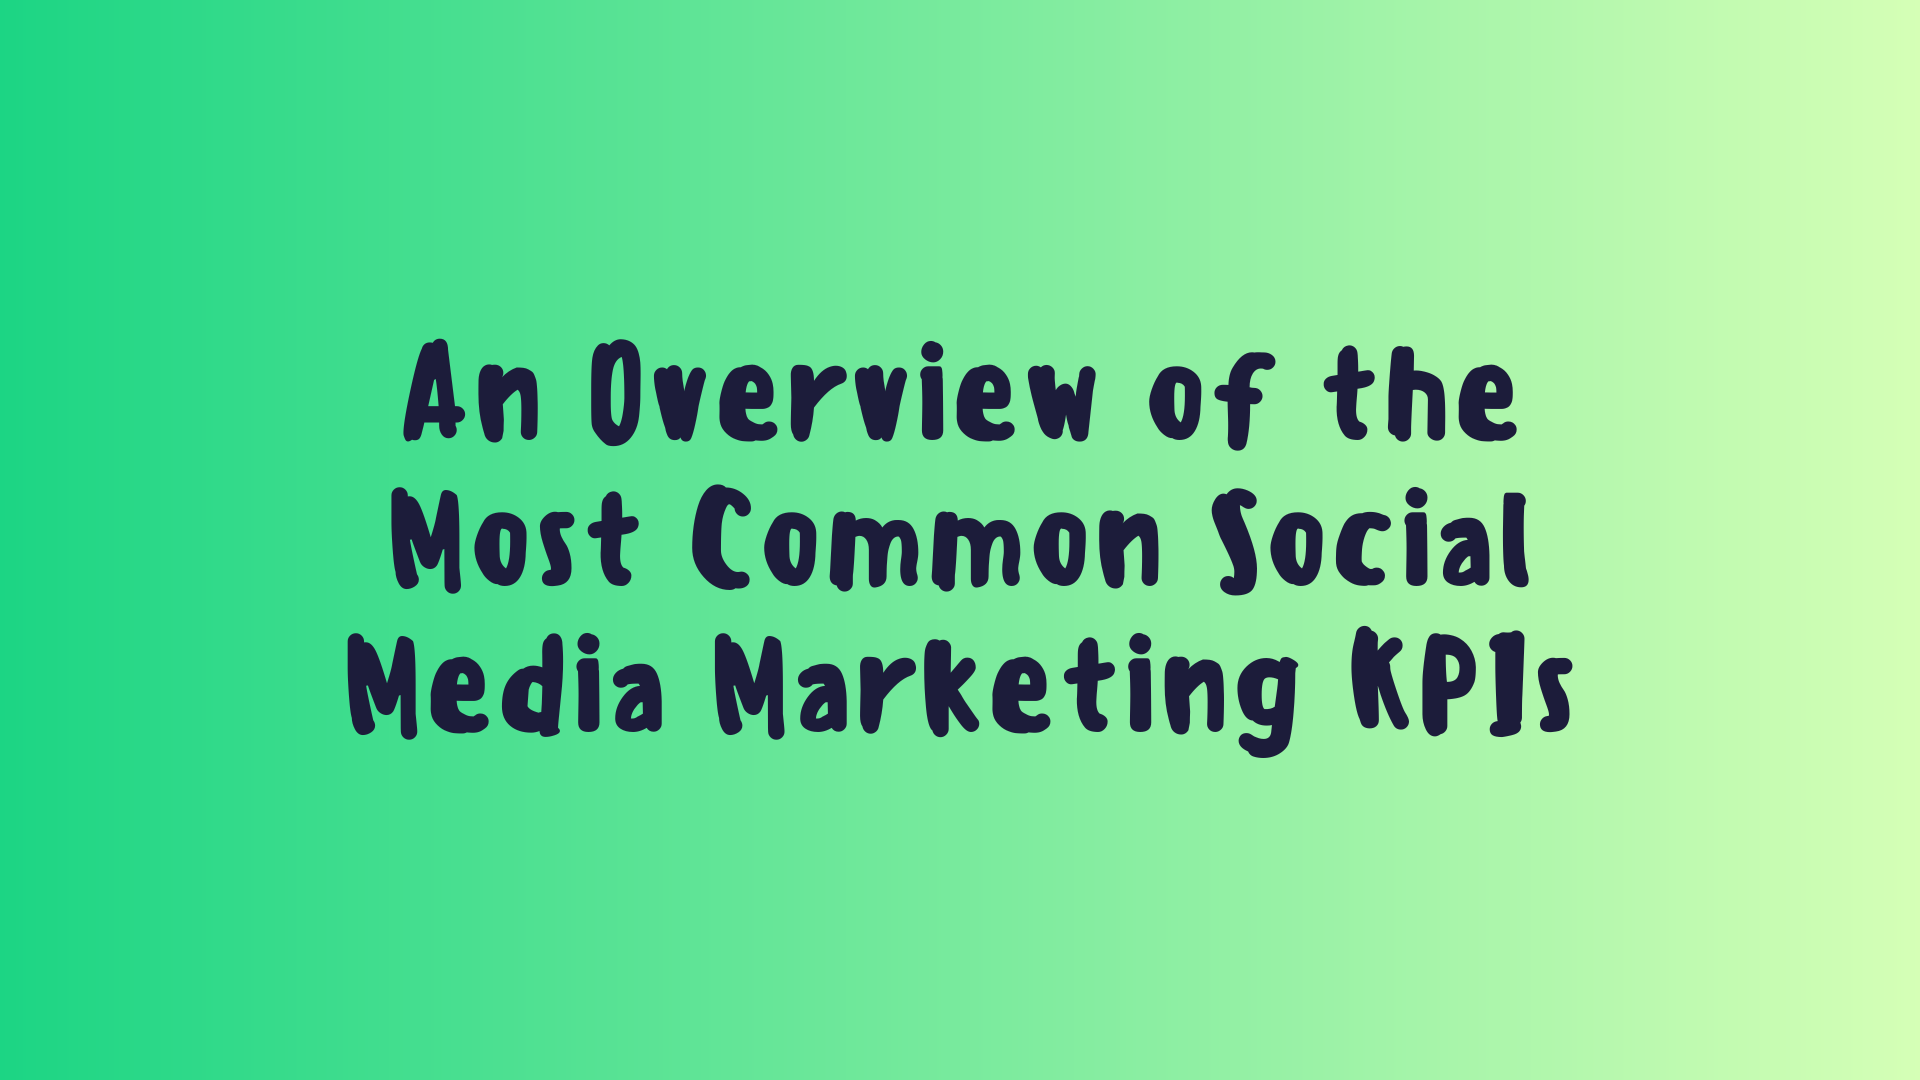 An Overview of the Most Common Social Media Marketing KPIs